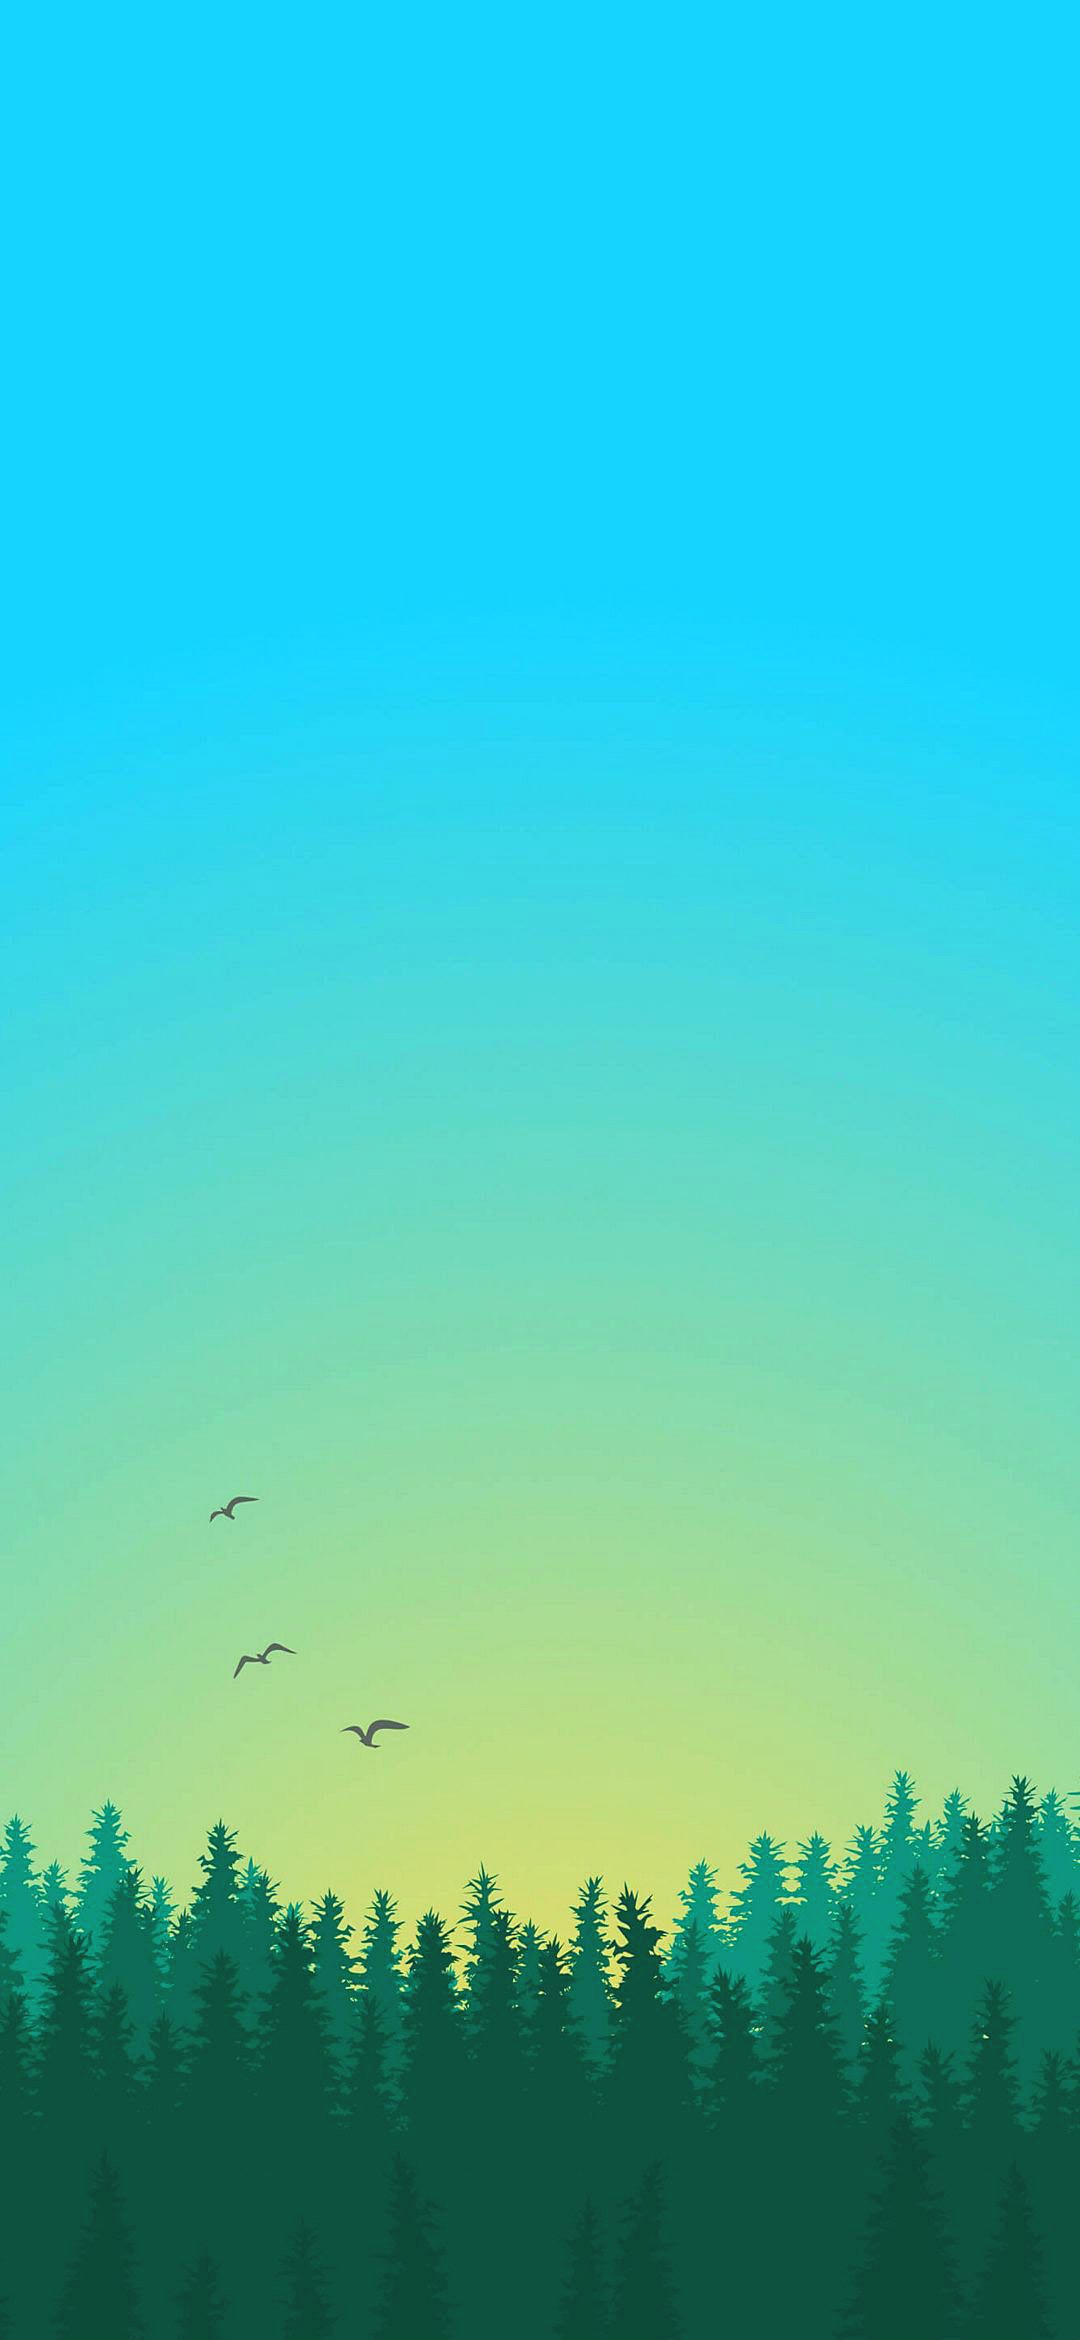 A Nature Minimal Wallpapers